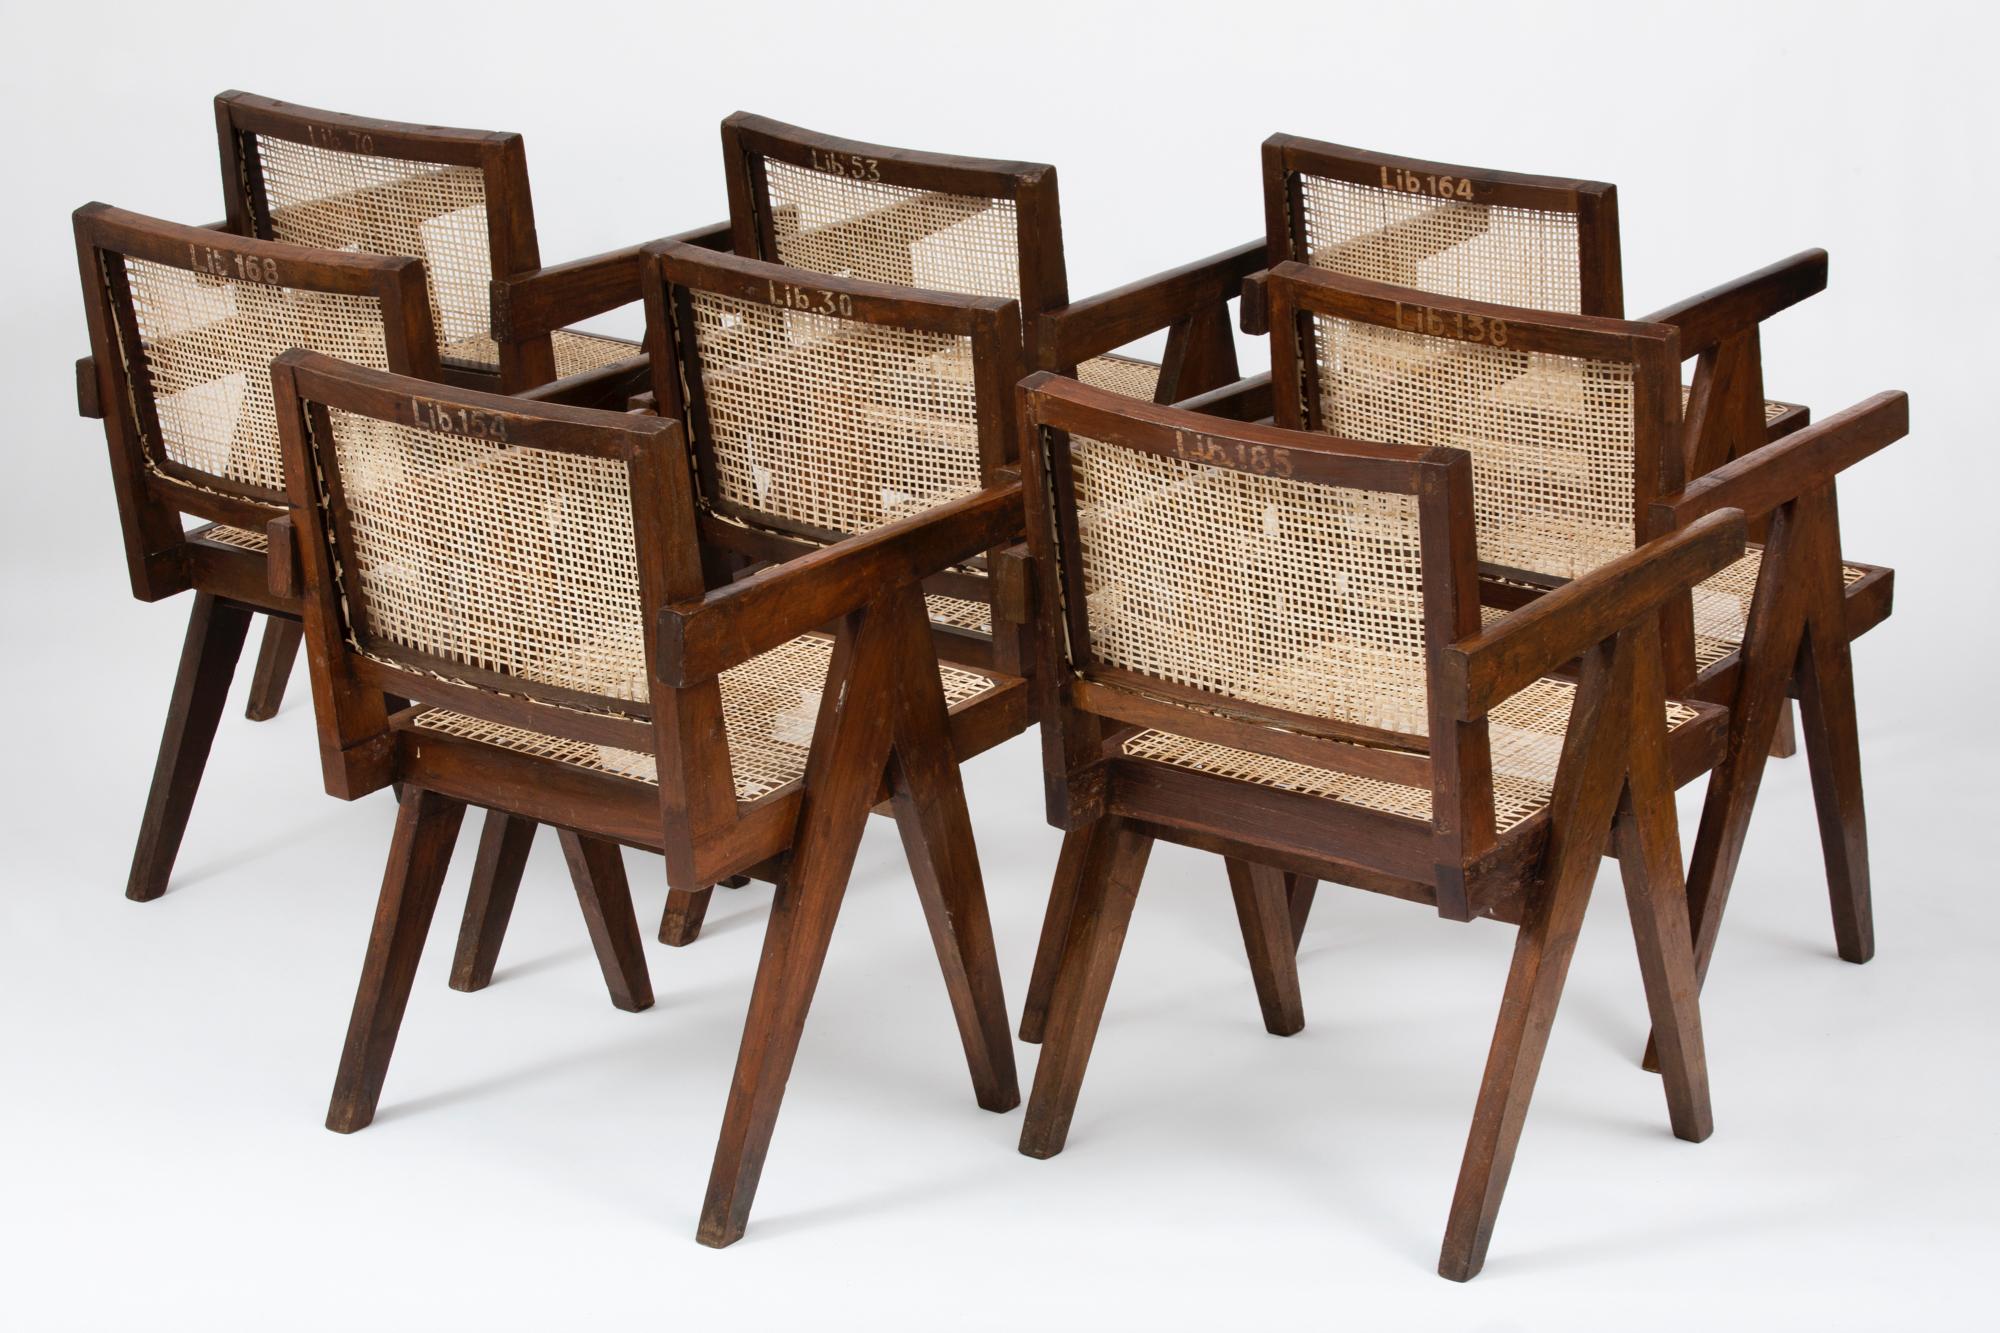 Original cane and teak armchairs designed by Pierre Jeanneret. These chairs were created for the famous modernist capital city of Chandigarh, India that was designed by Le Corbusier, Jeanneret, and their team. Model number PJ-SI-28-D

*Please